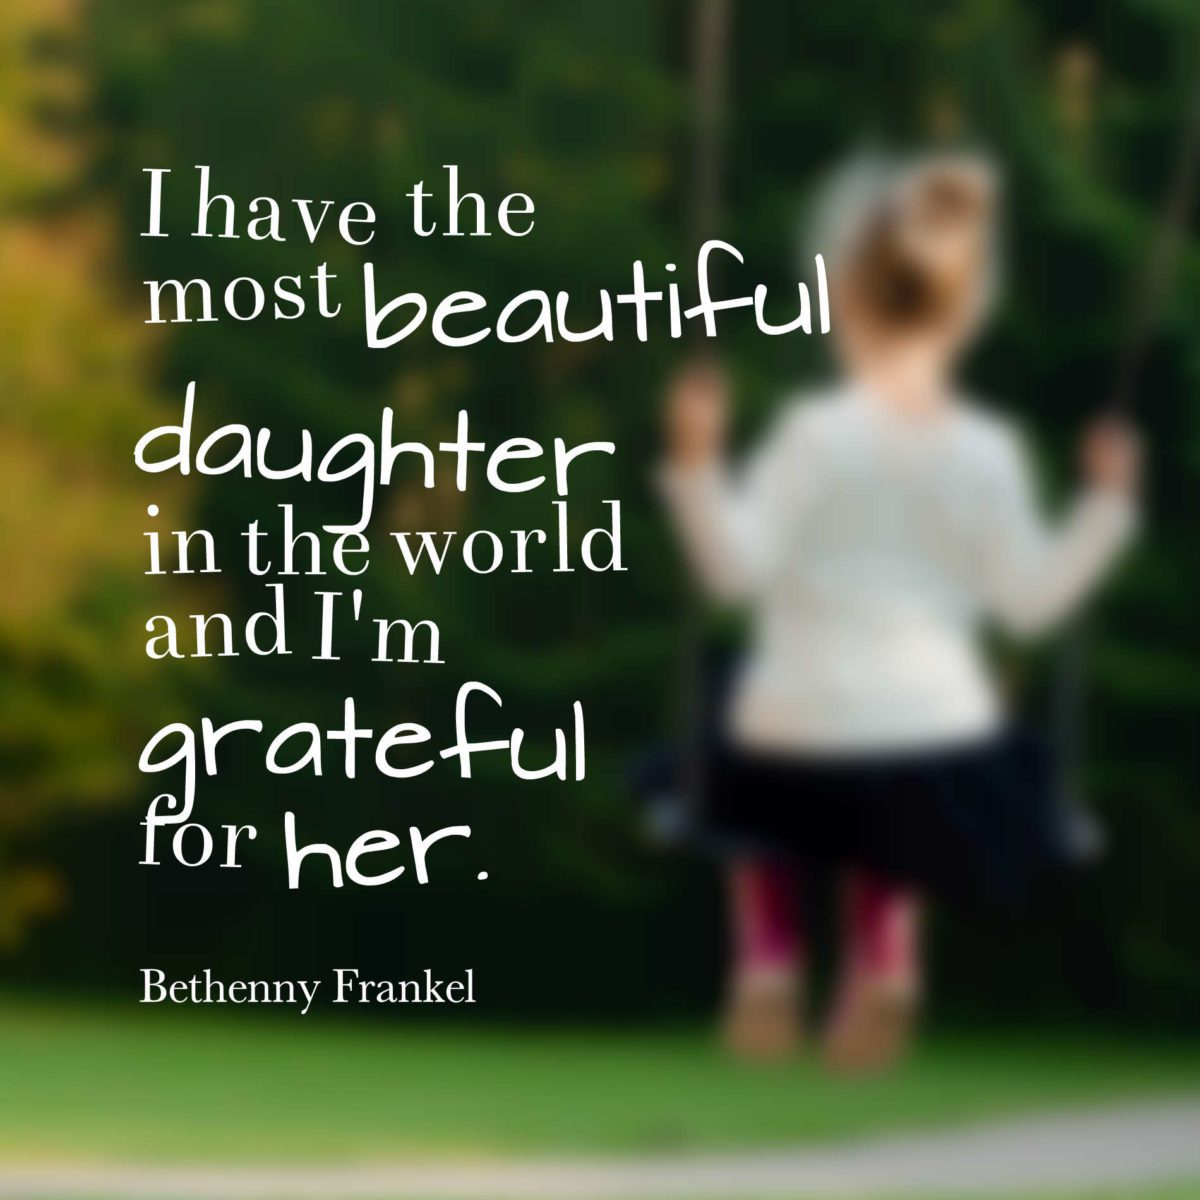 What is the best heart touching quote for a daughter?